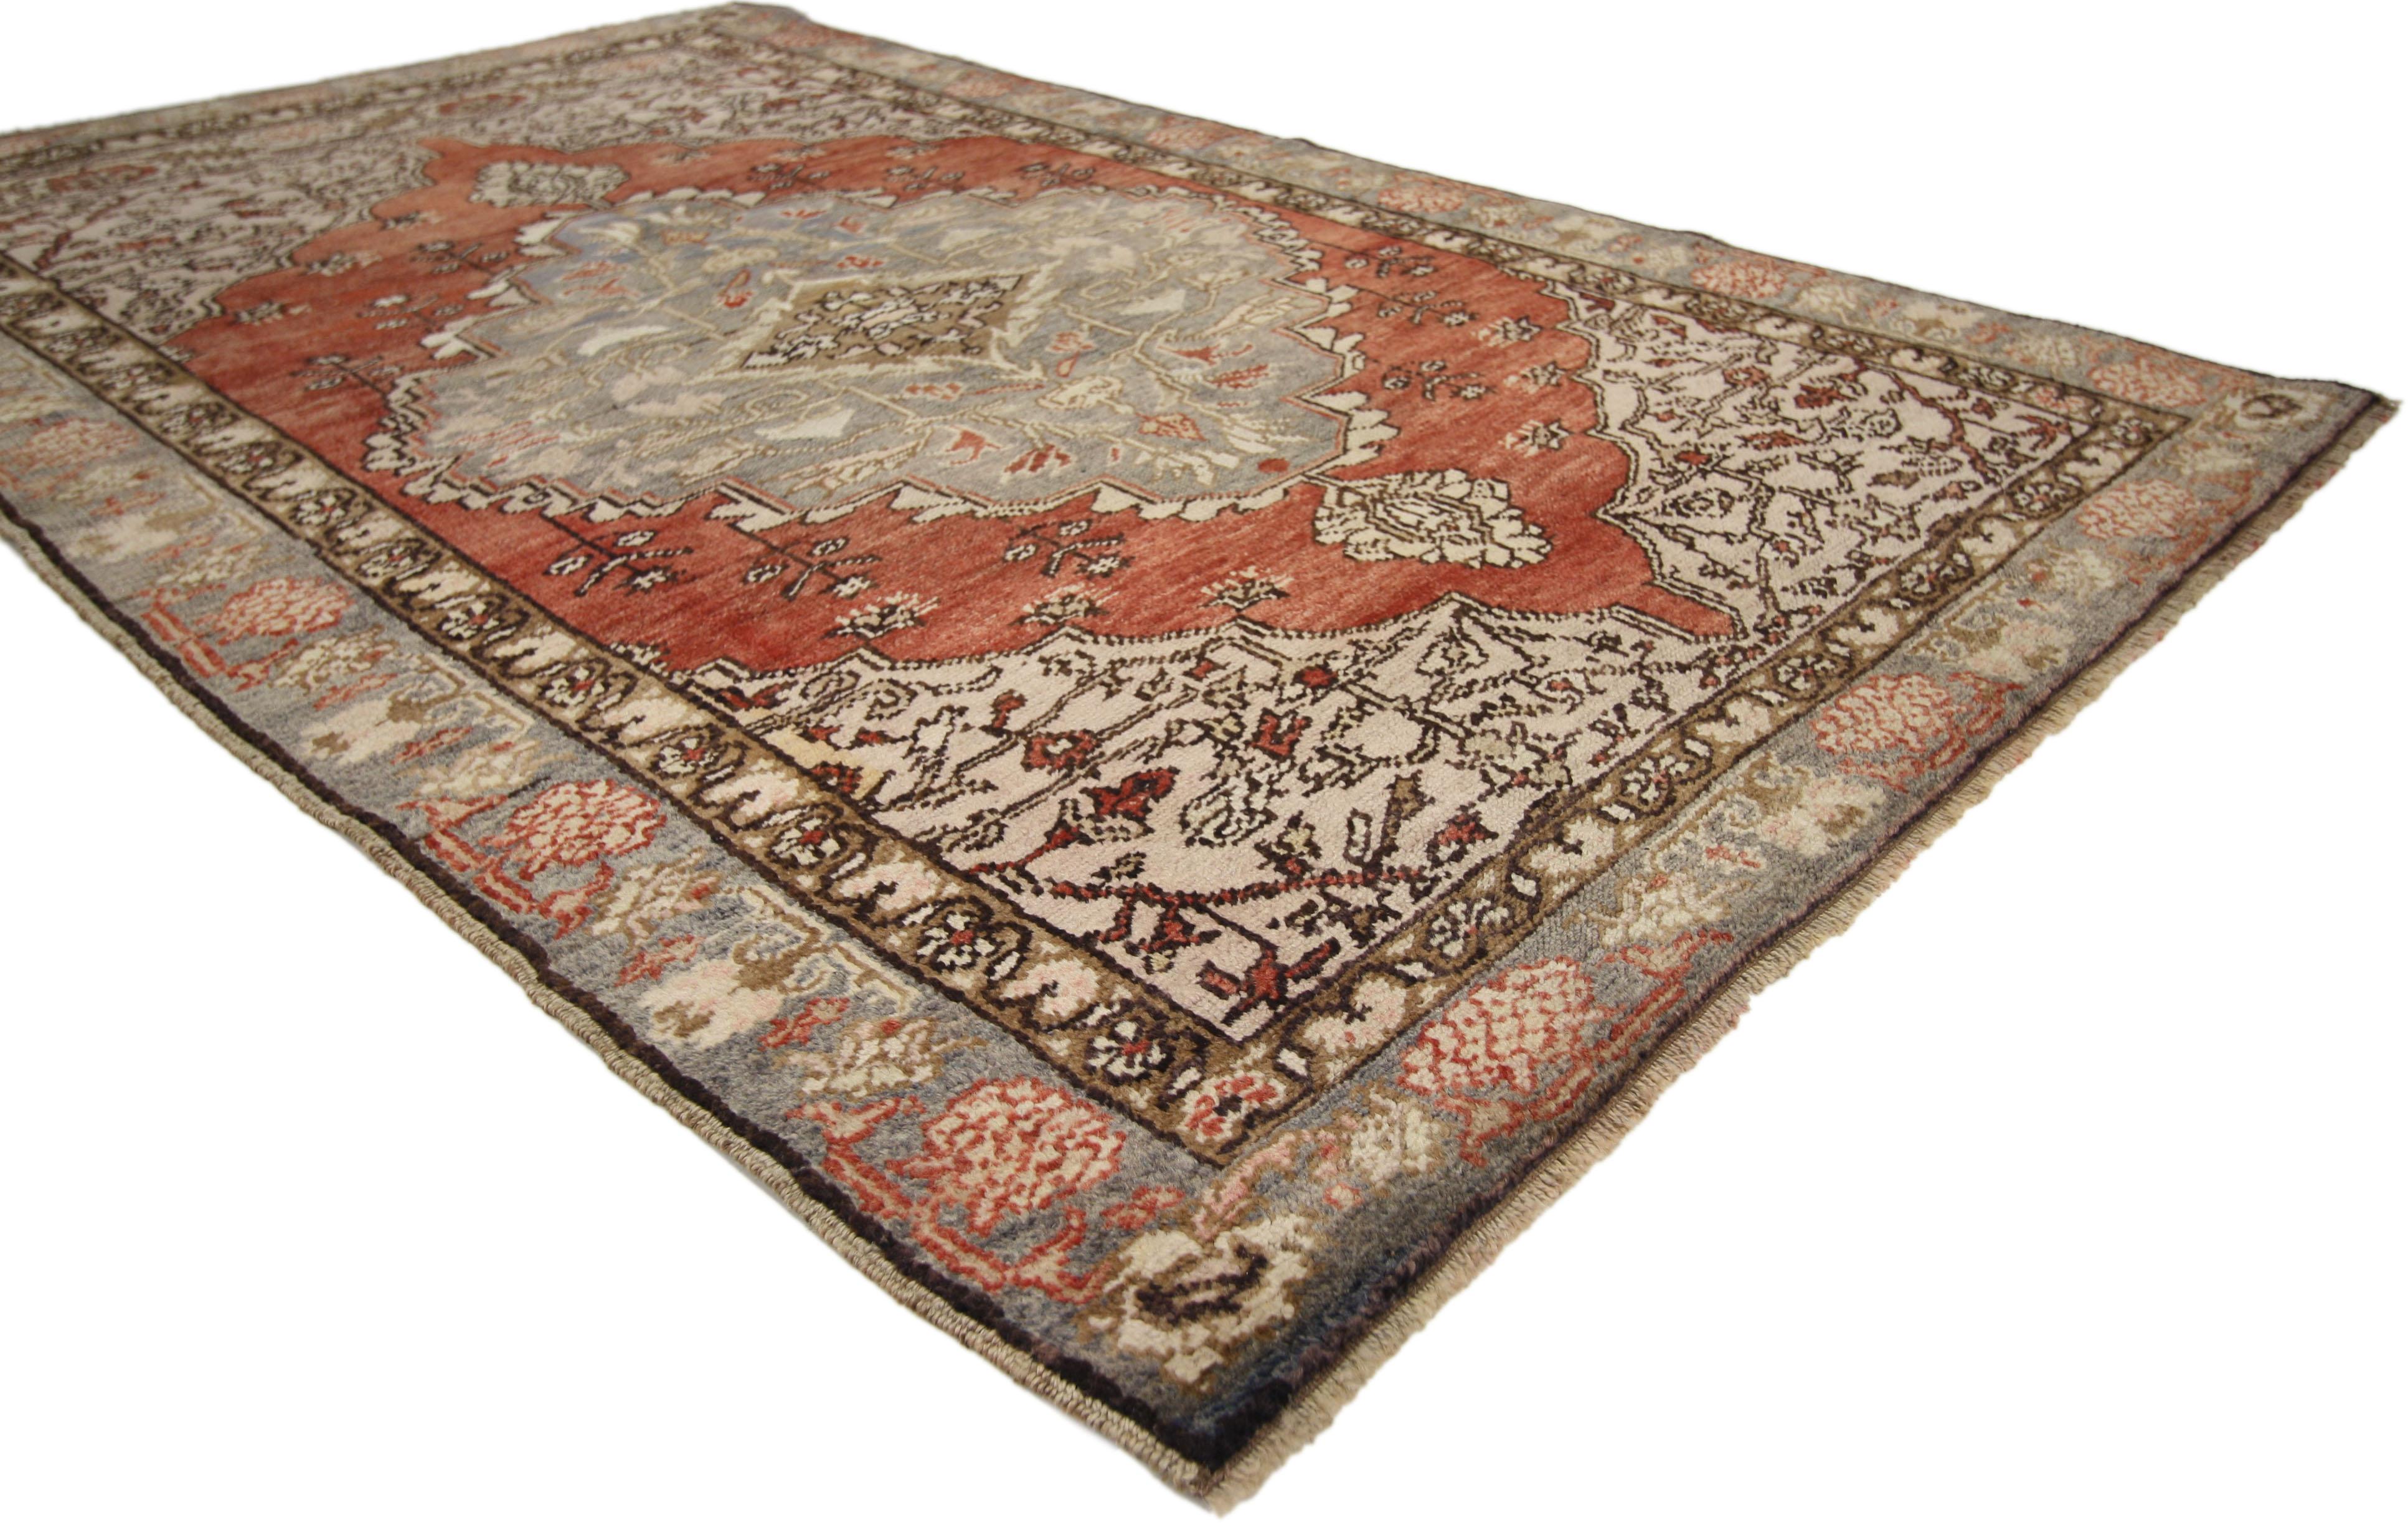 50300, vintage Turkish Oushak rug, hall accent, foyer or entry rug with French Country style. This hand knotted wool vintage Turkish Oushak rug features a large scalloped diamond-shaped medallion with palmette pendants floating in the center of an